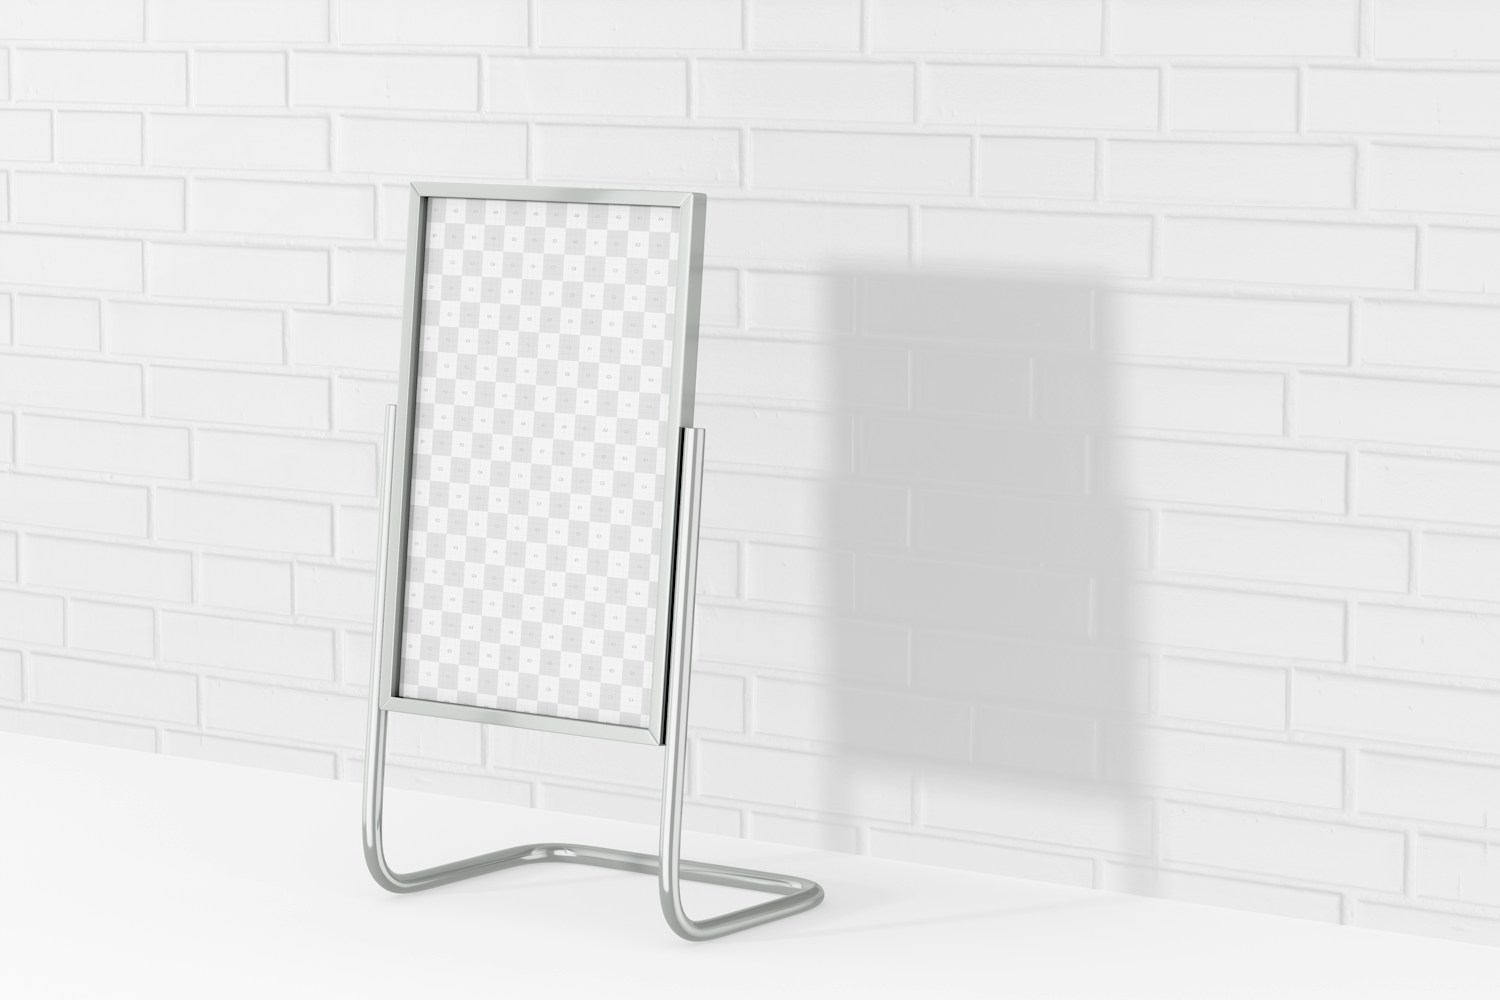 Advertisement Sign Stand Mockup